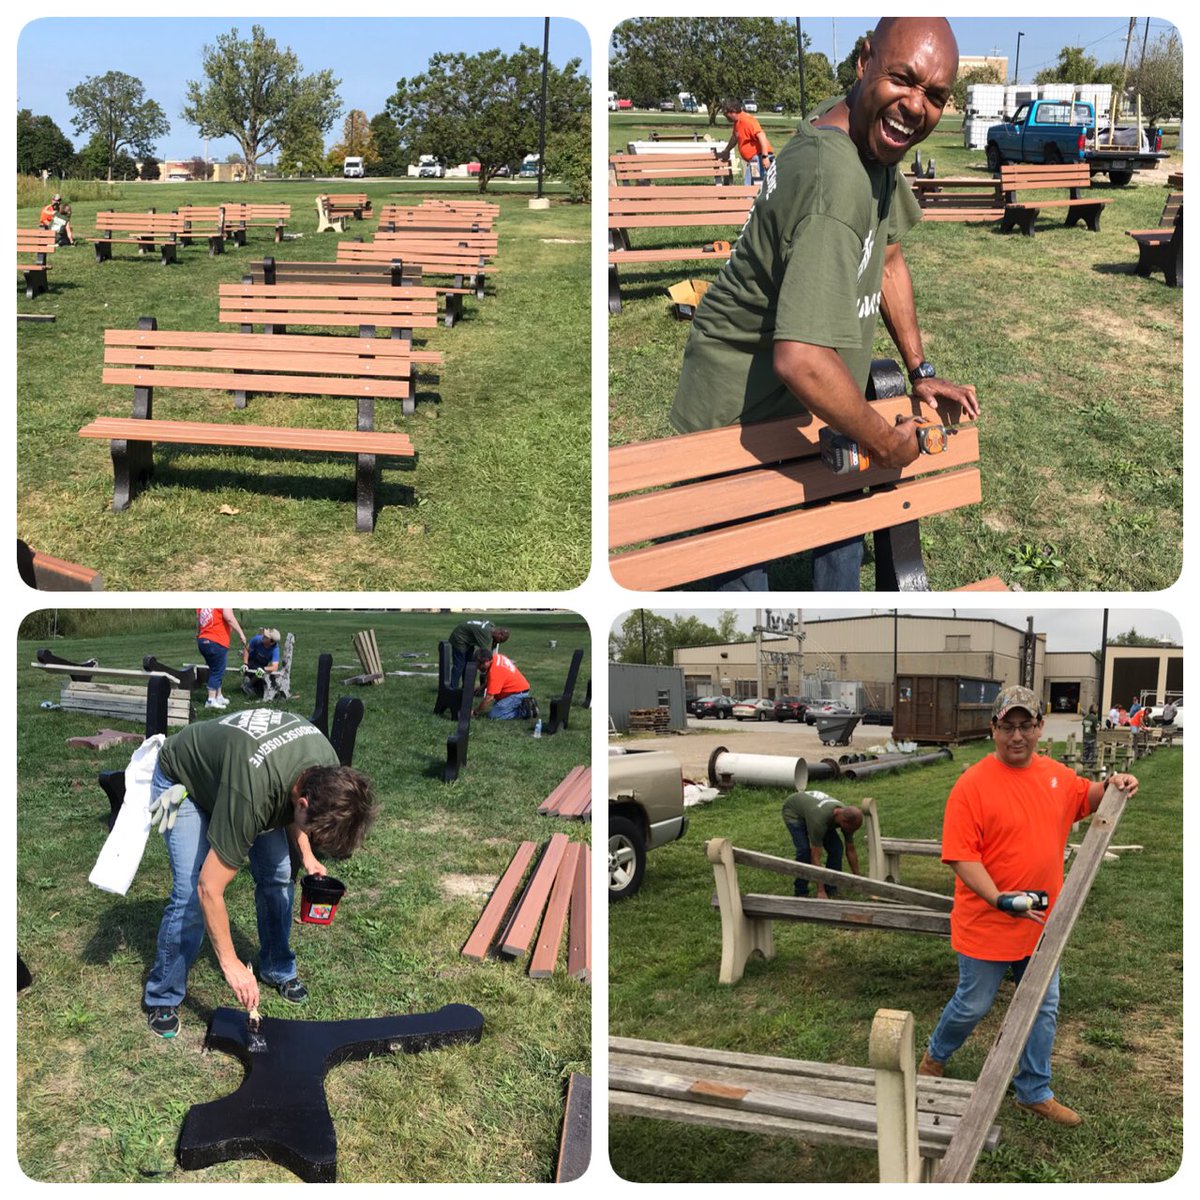 #TeamDepot #CelebrationOfService It’s all coming together @ The Ohio Veterans Home of Sandusky. @LarenzoOates @collinshd @John_Lerch @Blewitt1C @anthony23639629 @D117Cle